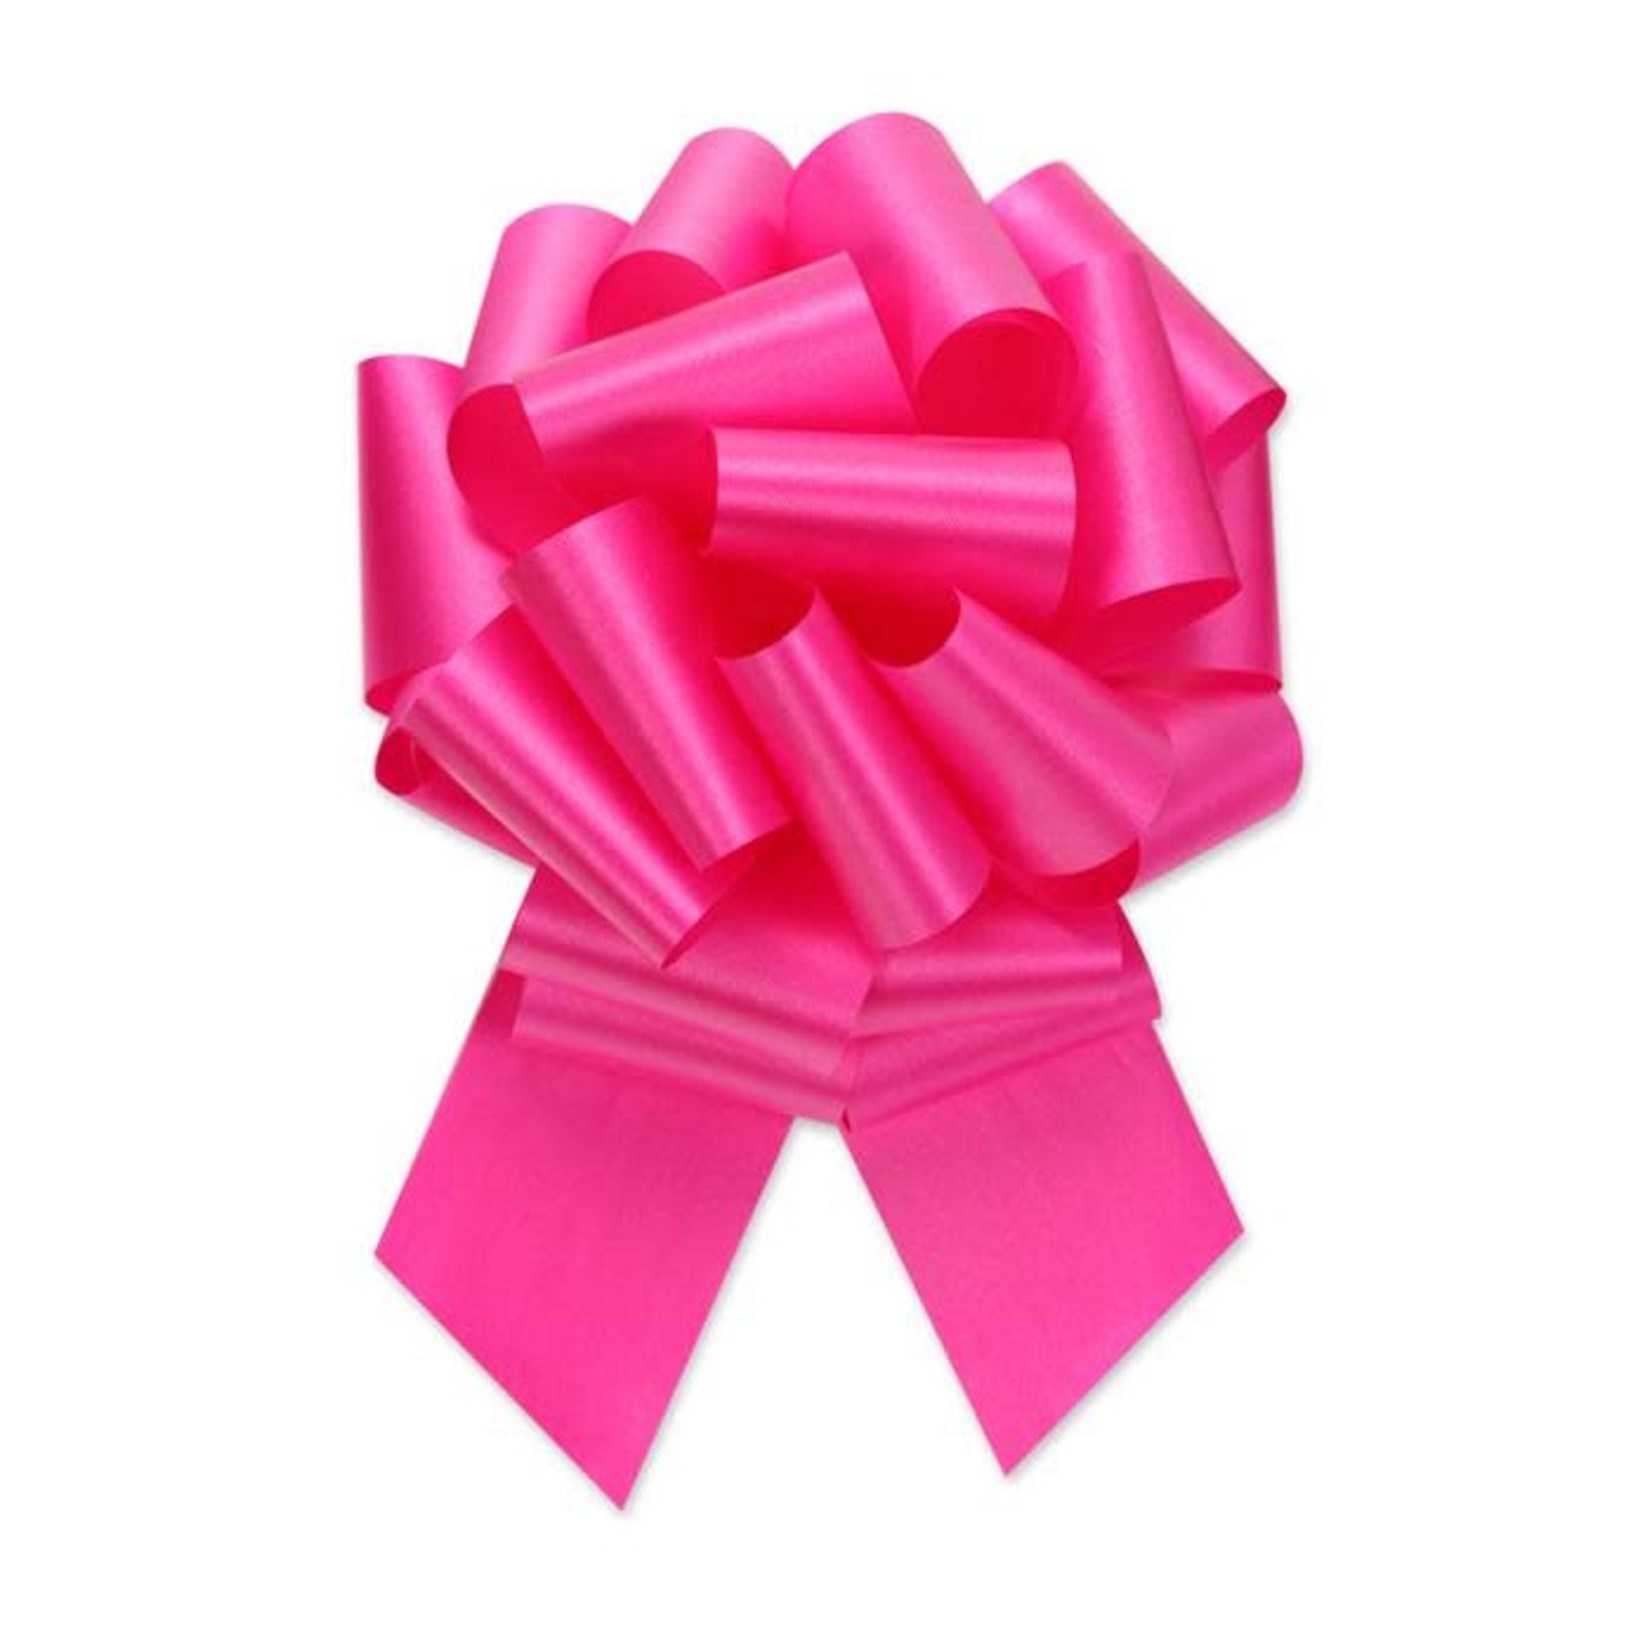 2.5" Perfect BoW  #40 BEAUTY, 2.5" ribbon width, 8"d bow size, 20 total loops